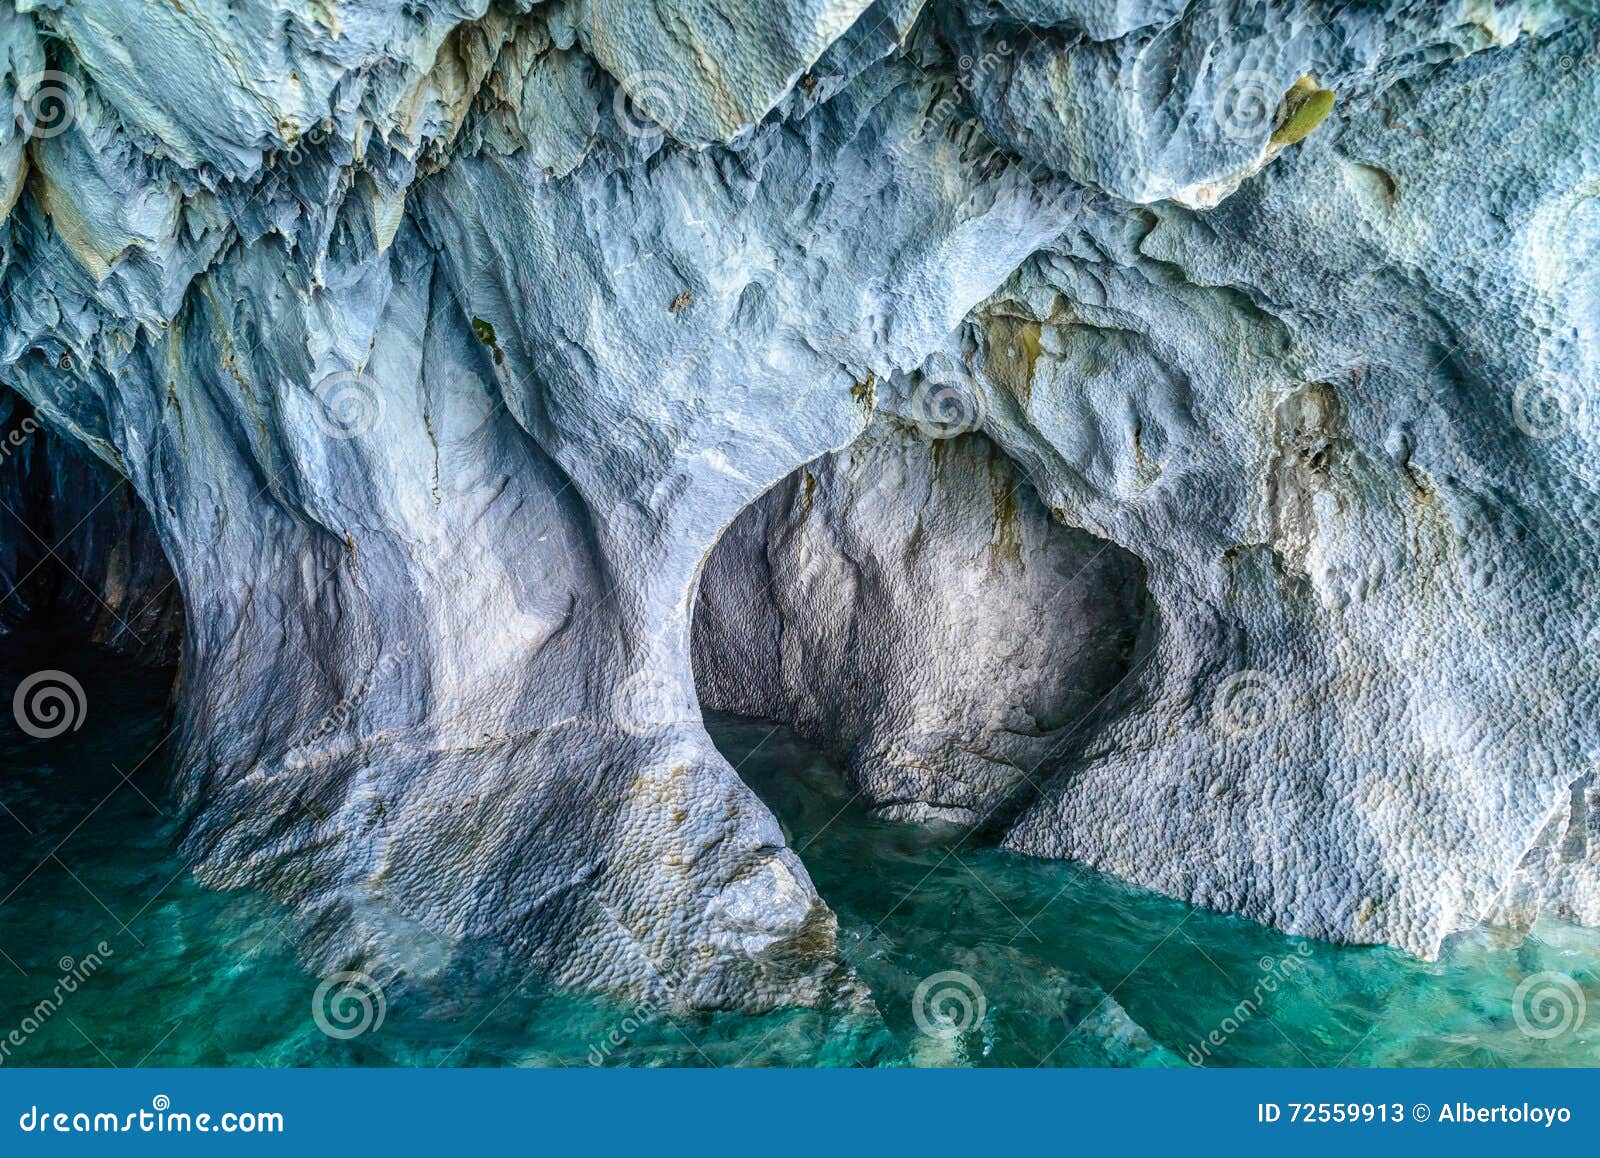 marble caves of lake general carrera (chile)